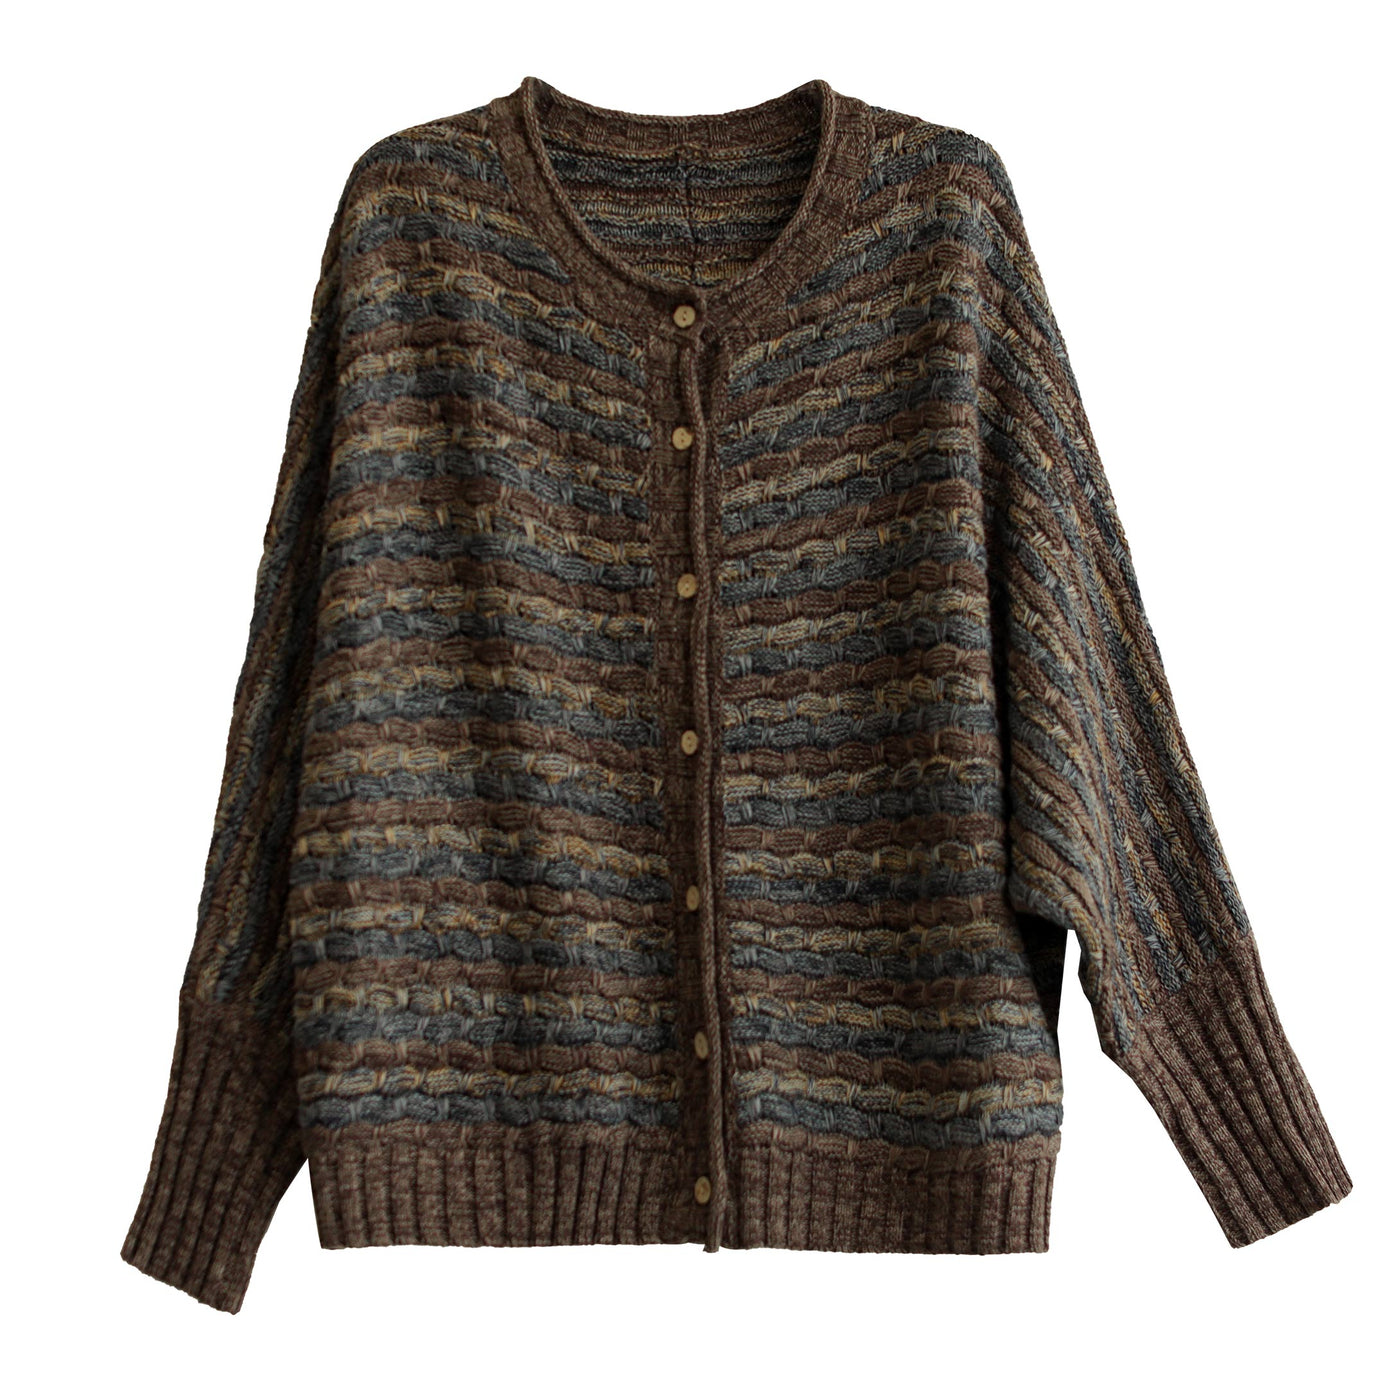 Retro Casual Stripe Cotton Knitted Cardigan